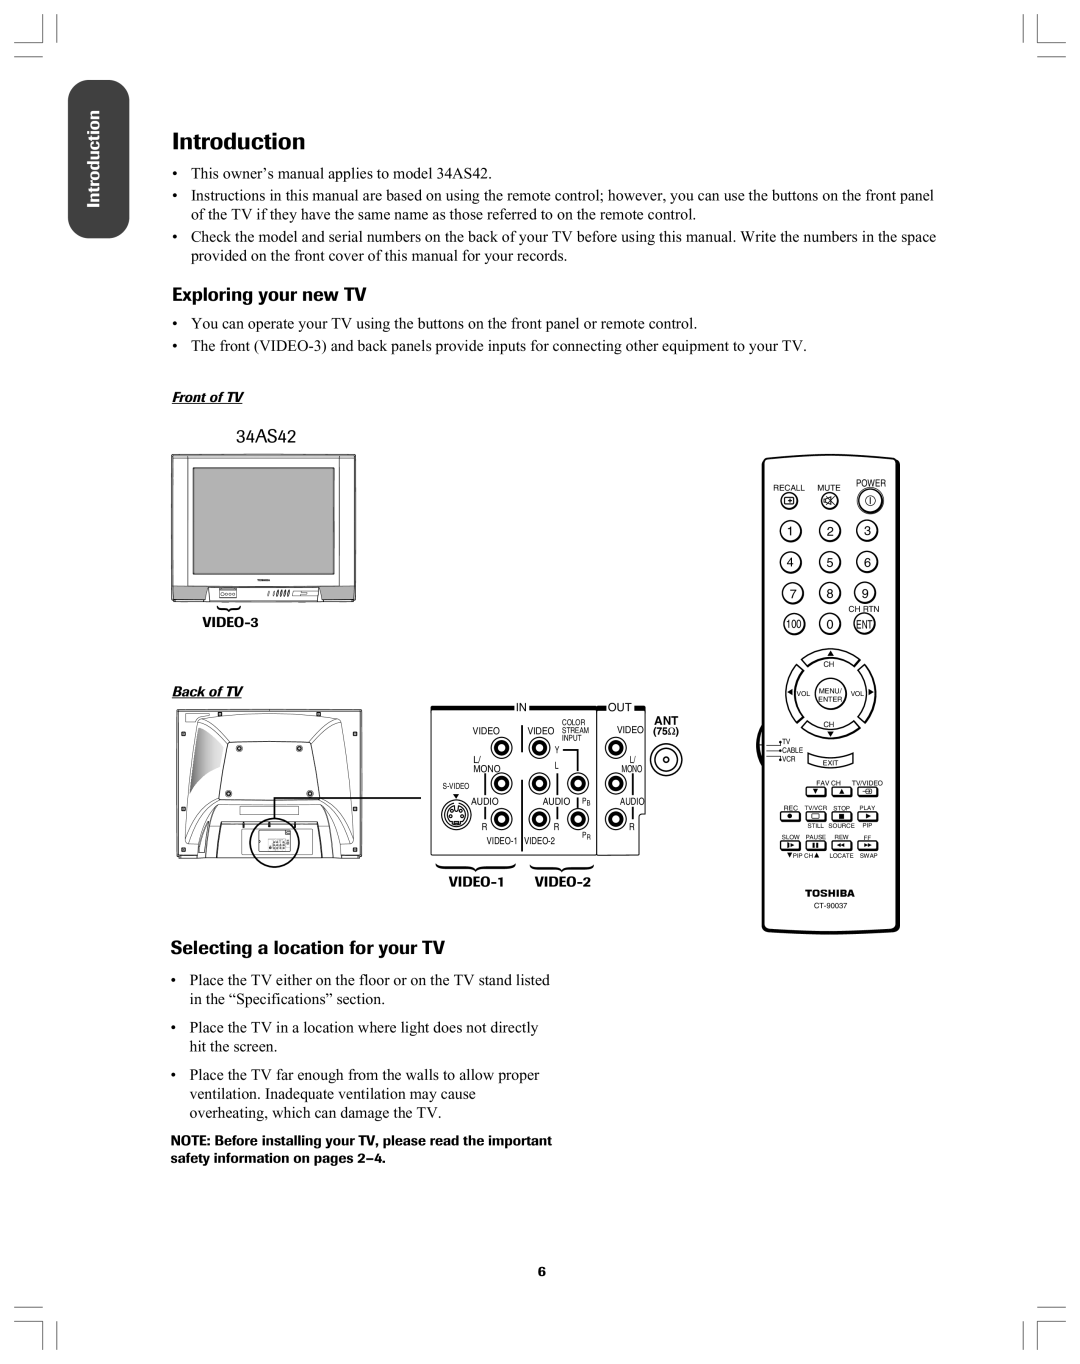 Toshiba 34AS42 owner manual Introduction, Exploring your new TV, Selecting a location for your TV 